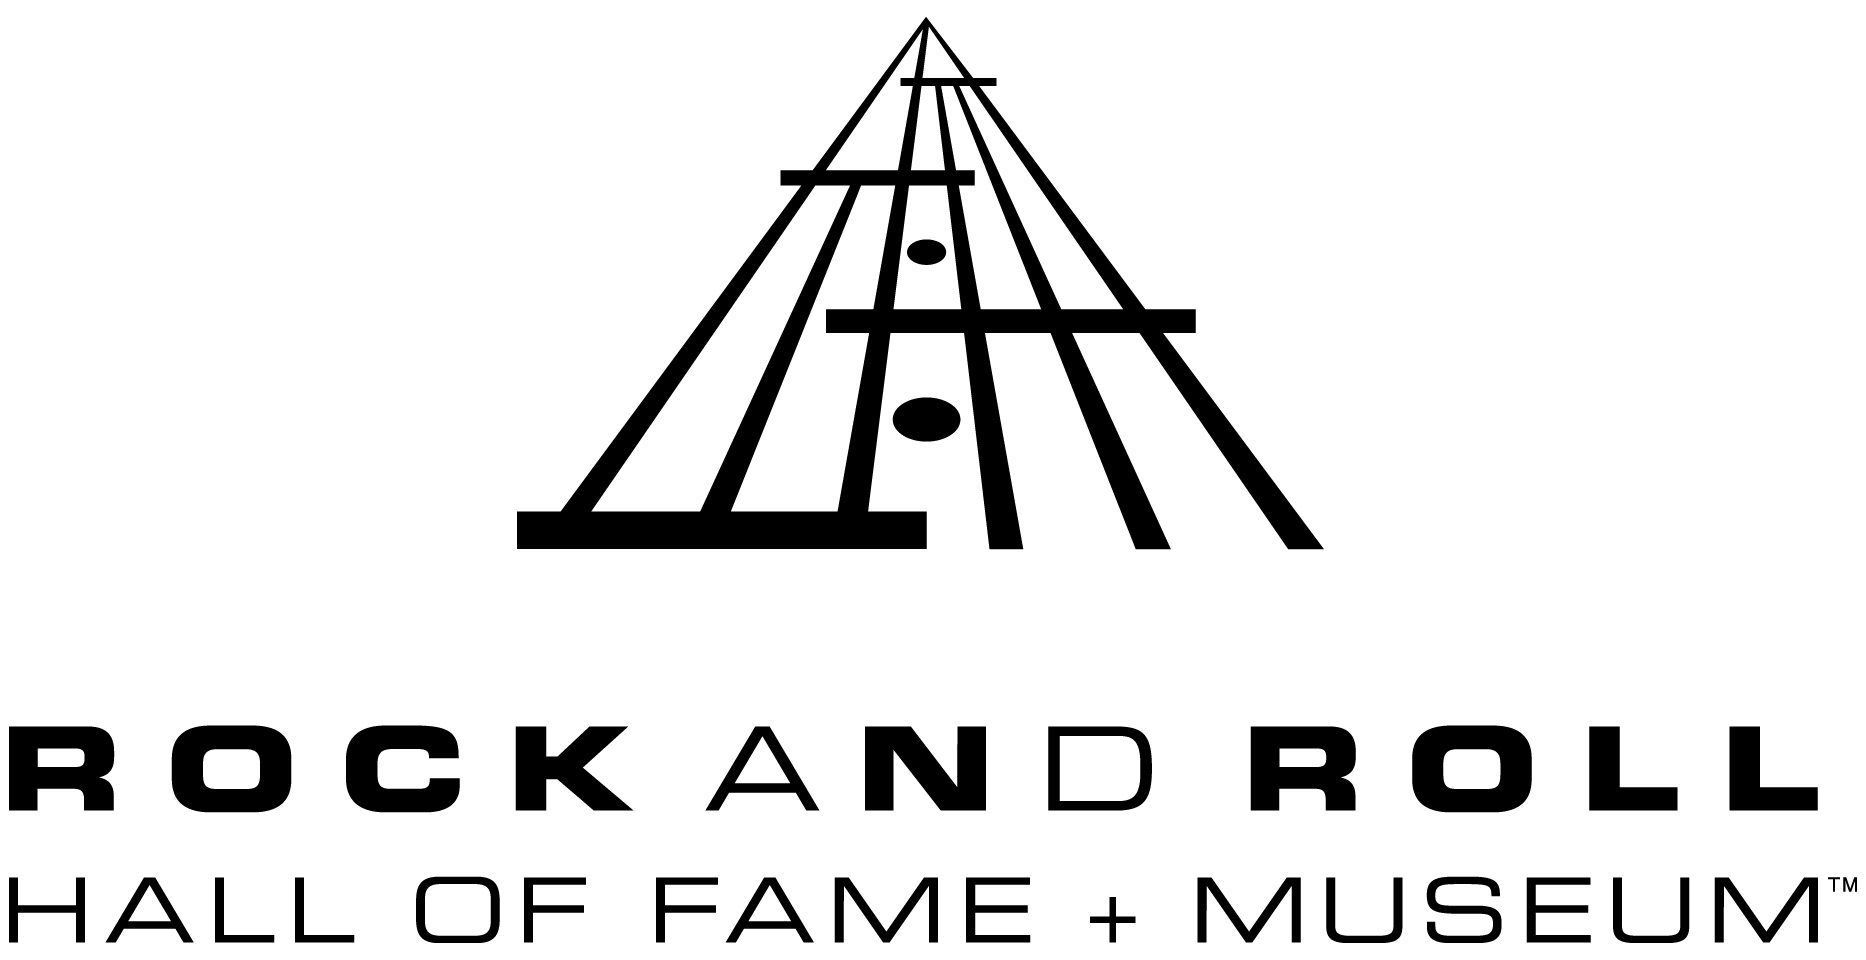 Welcome to the Rock Roll Hall of Fame